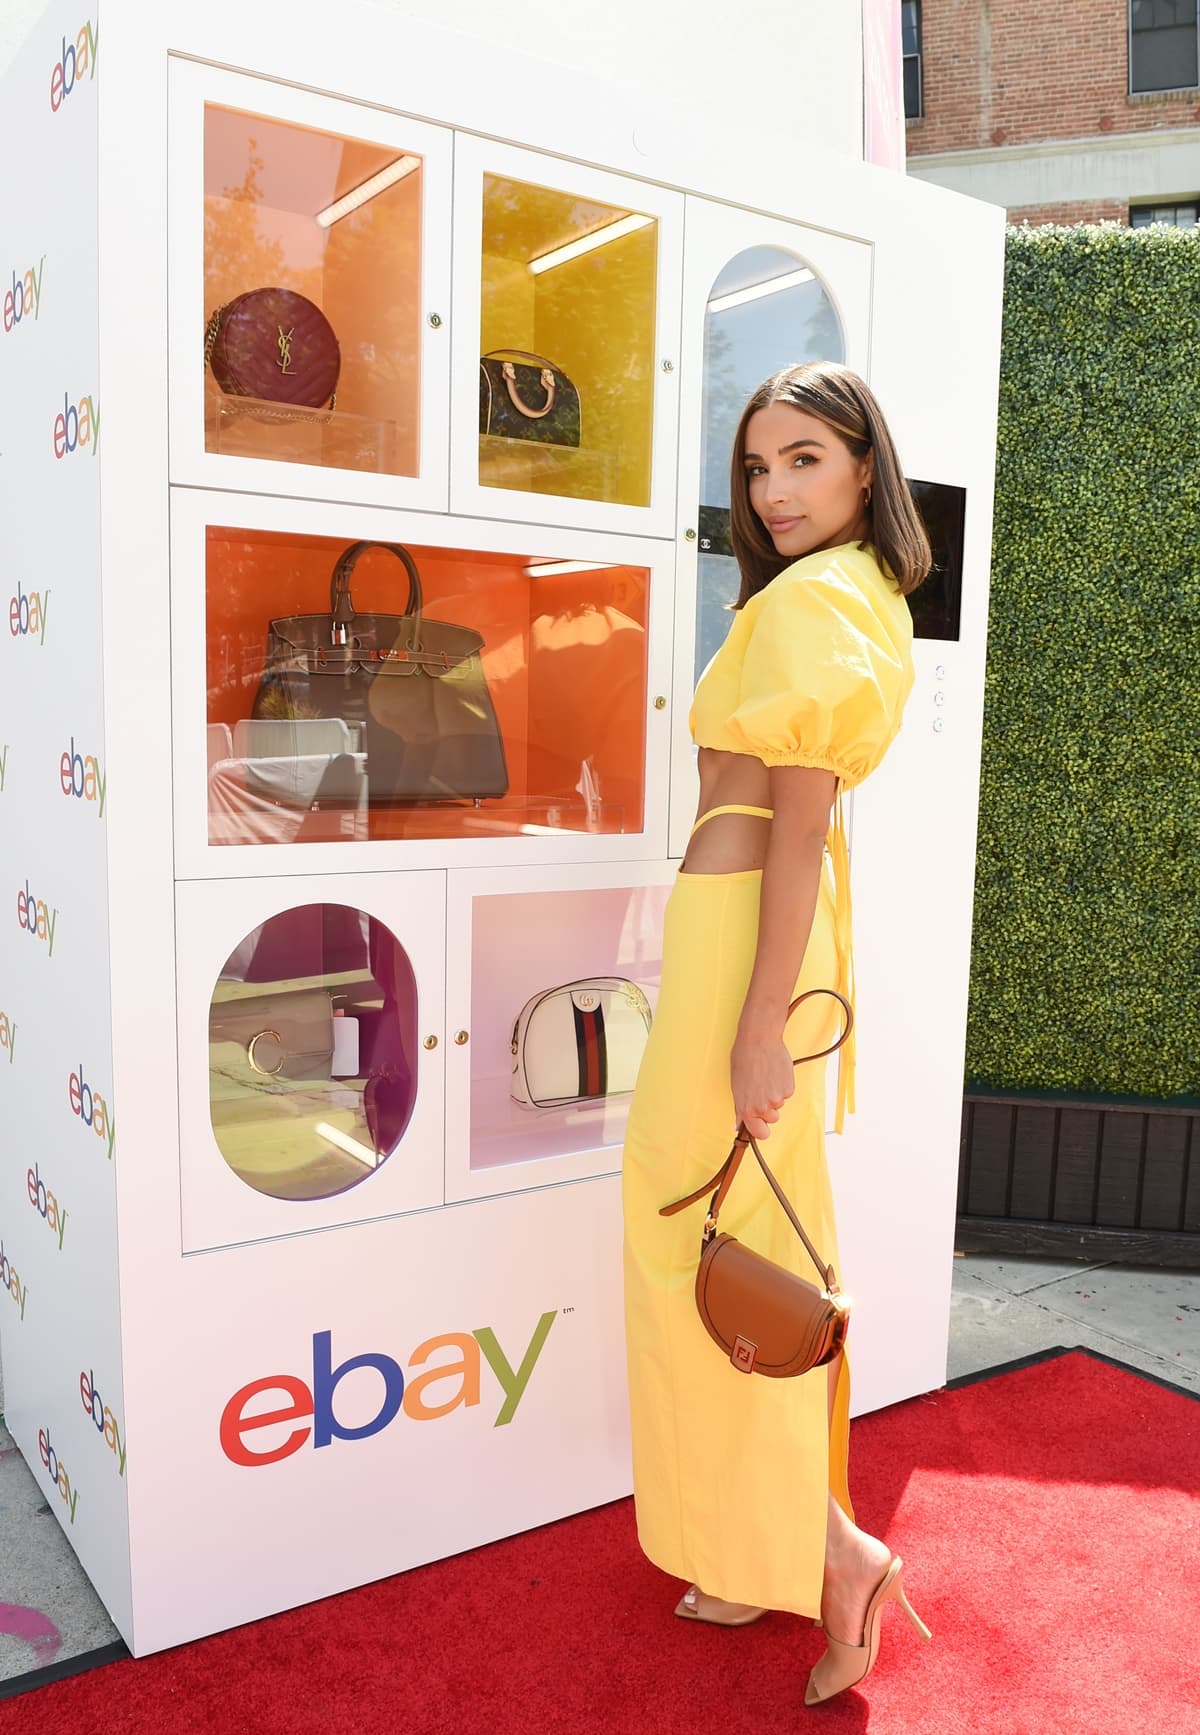 Olivia Culpo, in an outfit by Christopher Esber with Bottega Veneta sandals and a Fendi Moonlight saddle crossbody bag, poses in front of eBay's luxury handbag machine